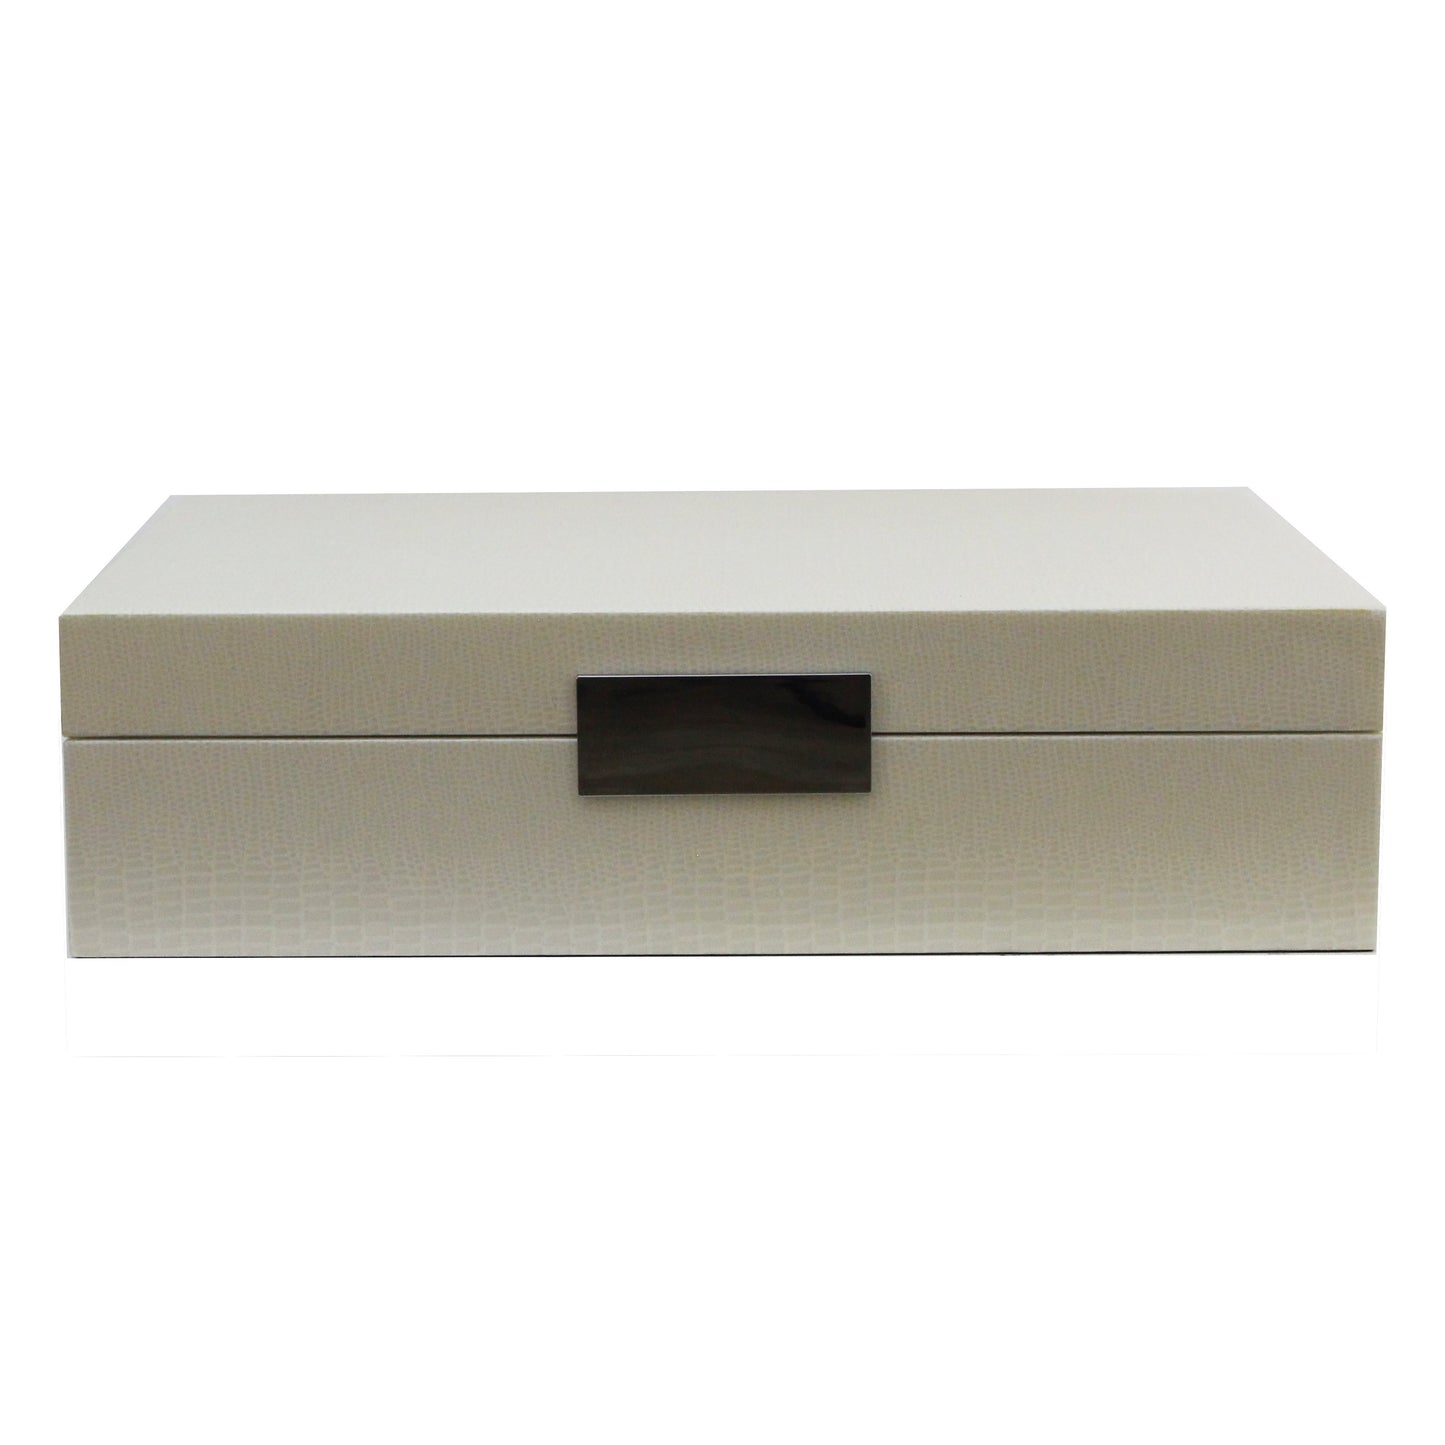 Large cream storage box with silver plated clasp